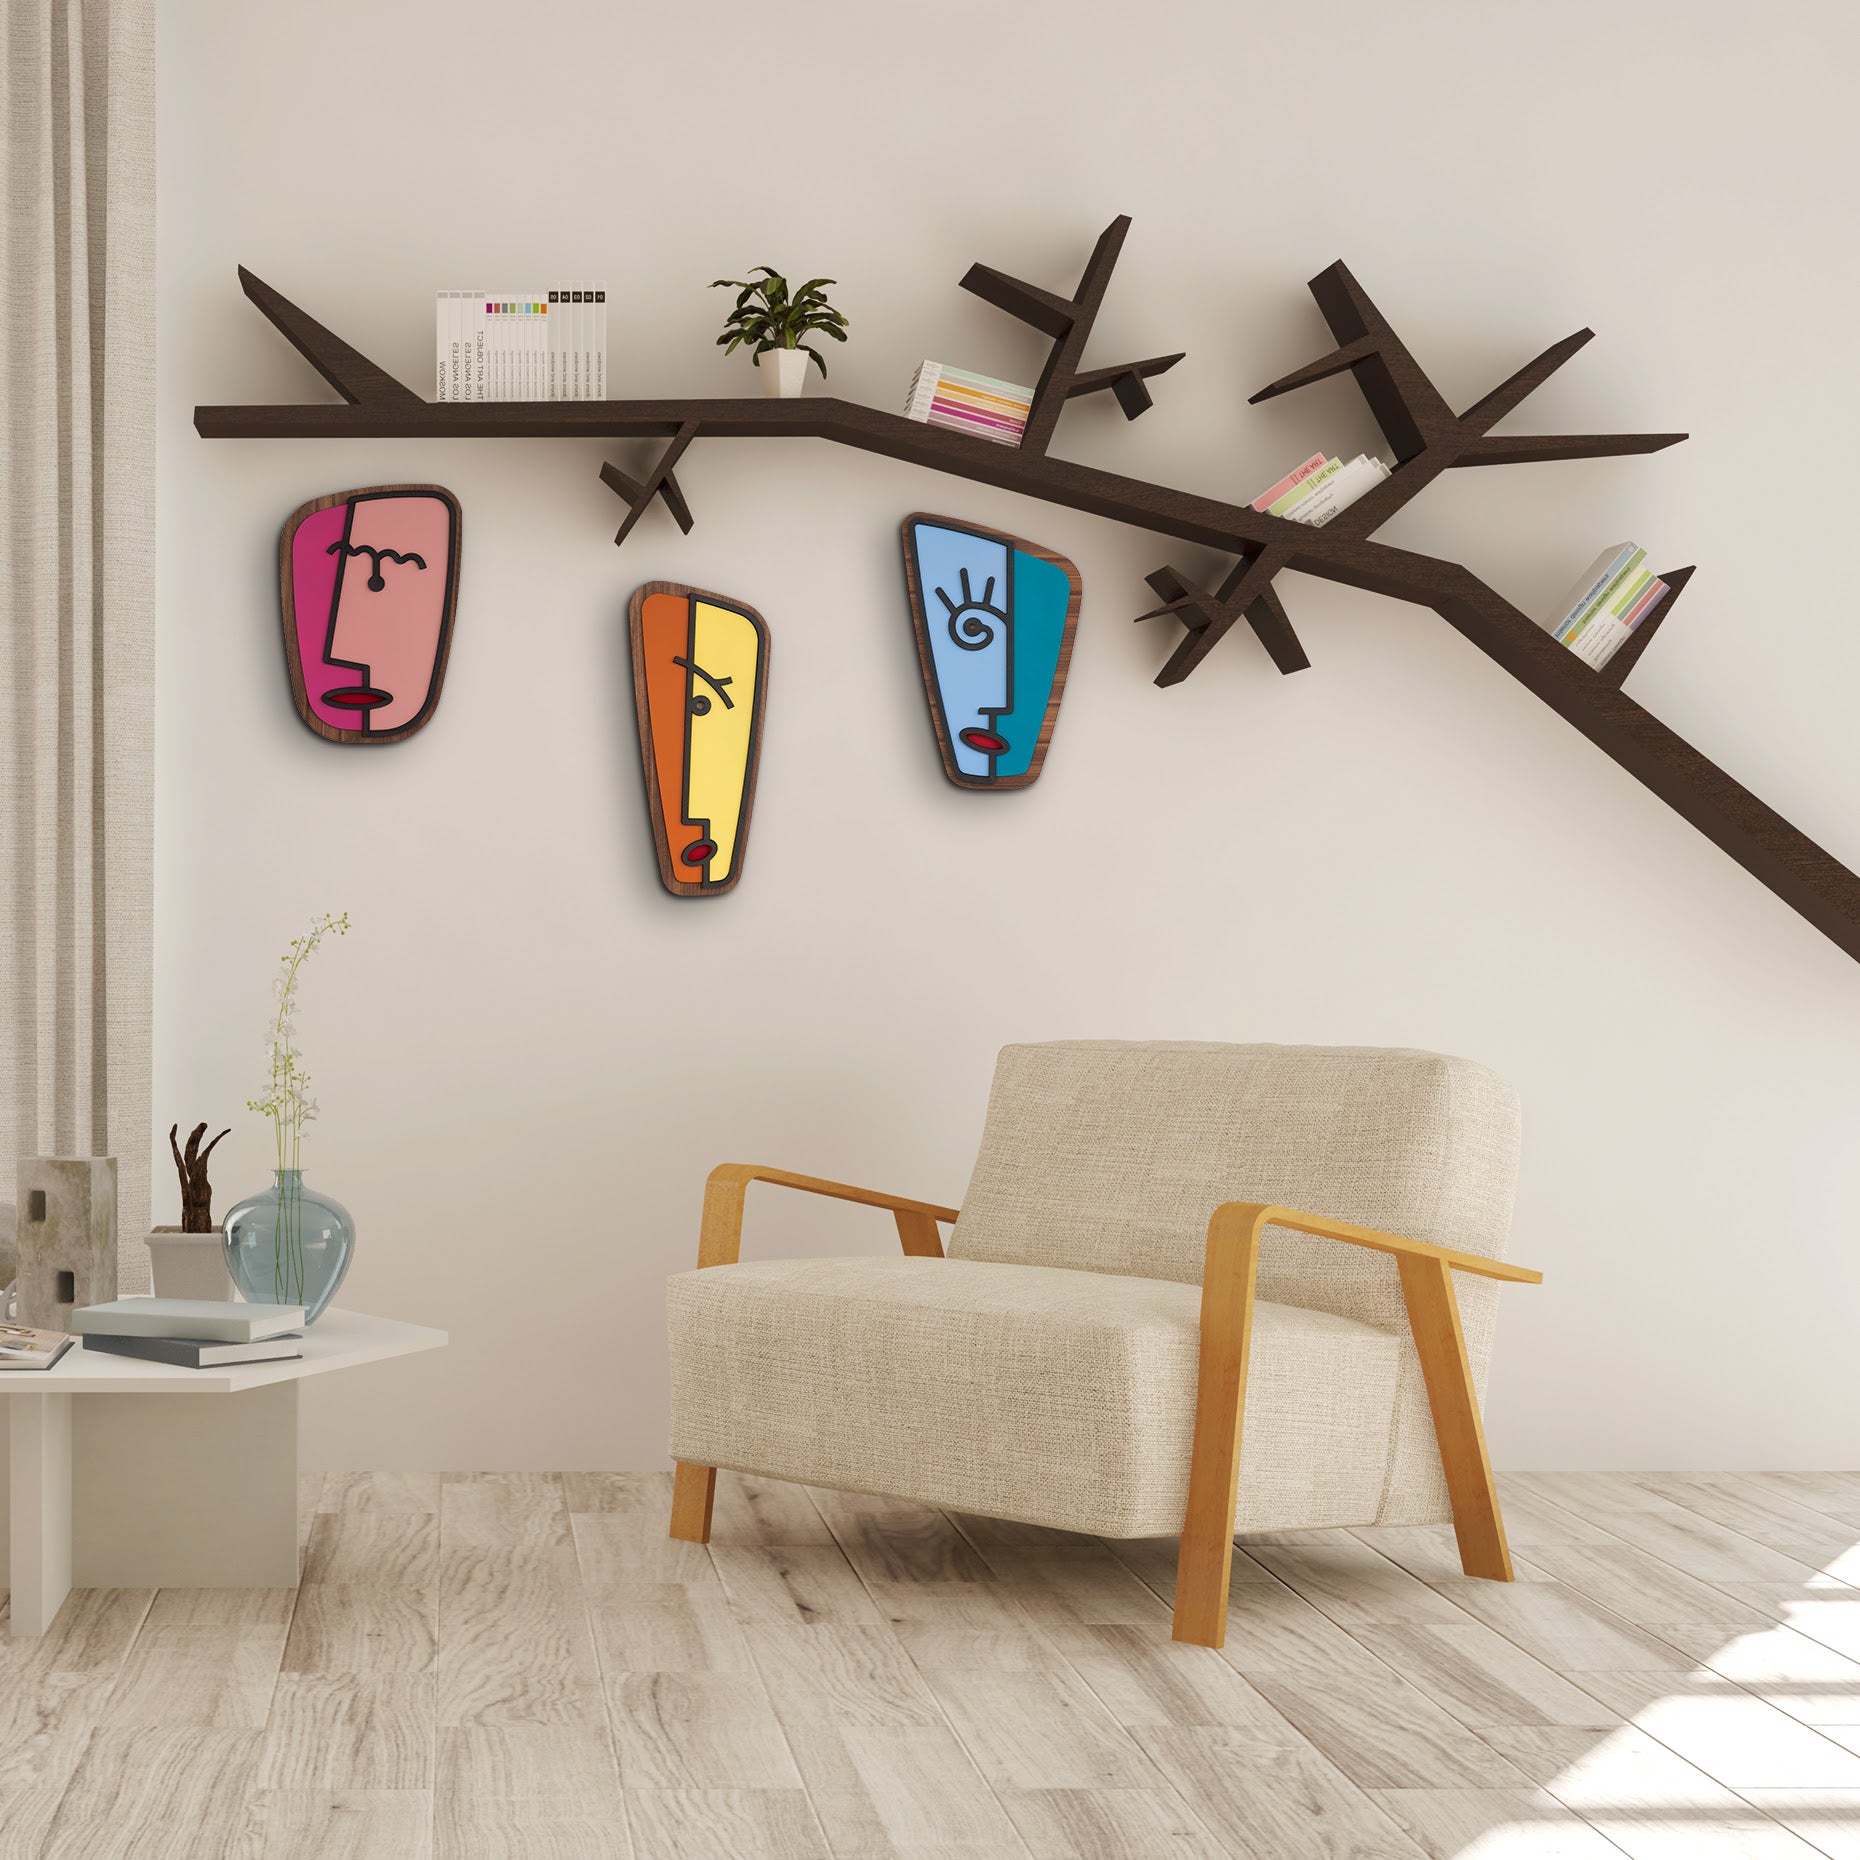 Reflect your face & personality with Picasso line drawings in wall decor